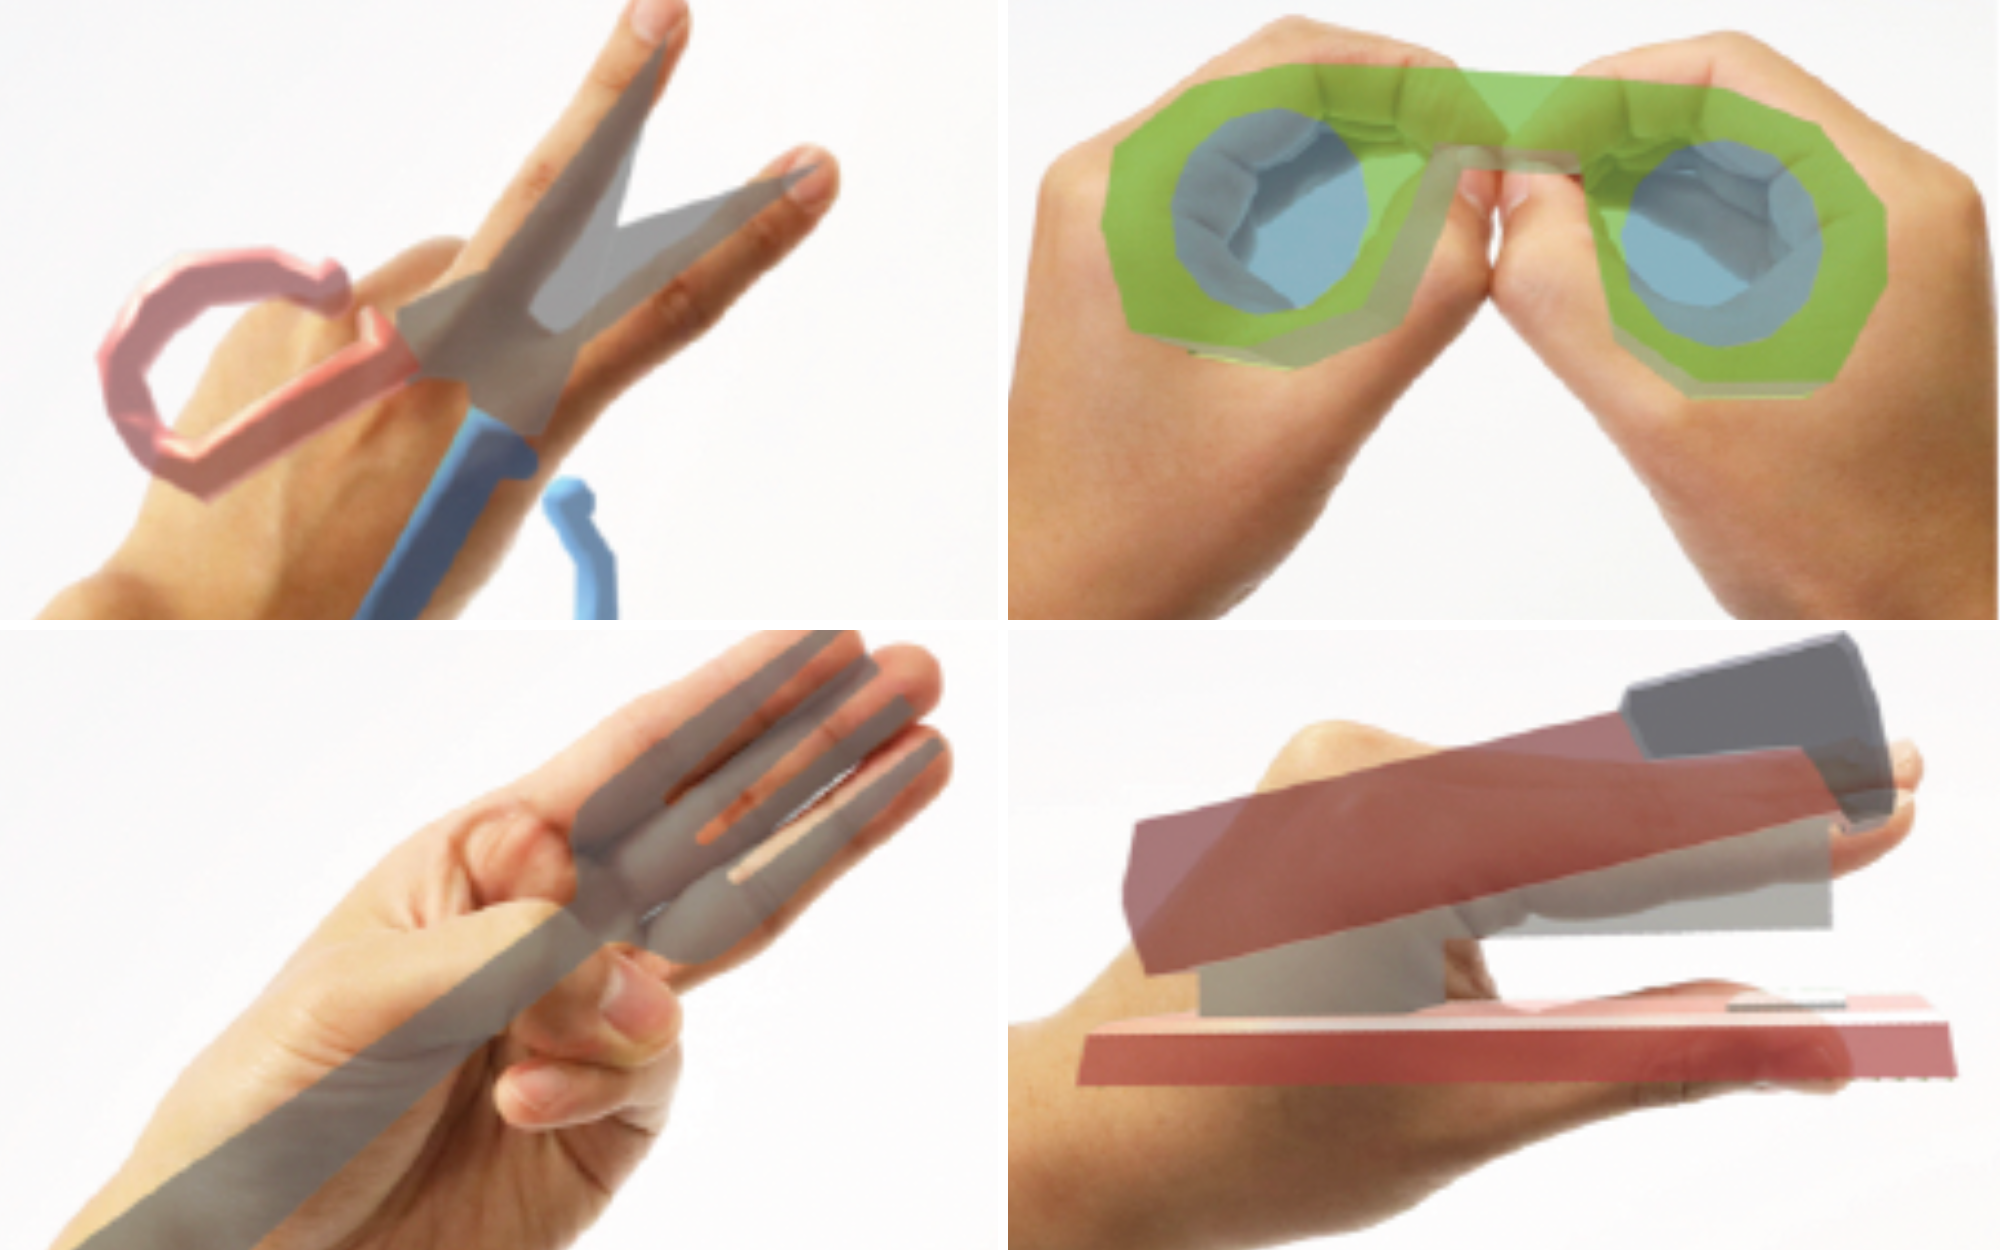 Four of many hand interfaces, including scissors (made by extending the index and middle fingers), binoculars (making circles with both hands and putting them together), forks (made by extending the index, middle, and ring fingers), and staplers (forming an alligator mouth with one hand).